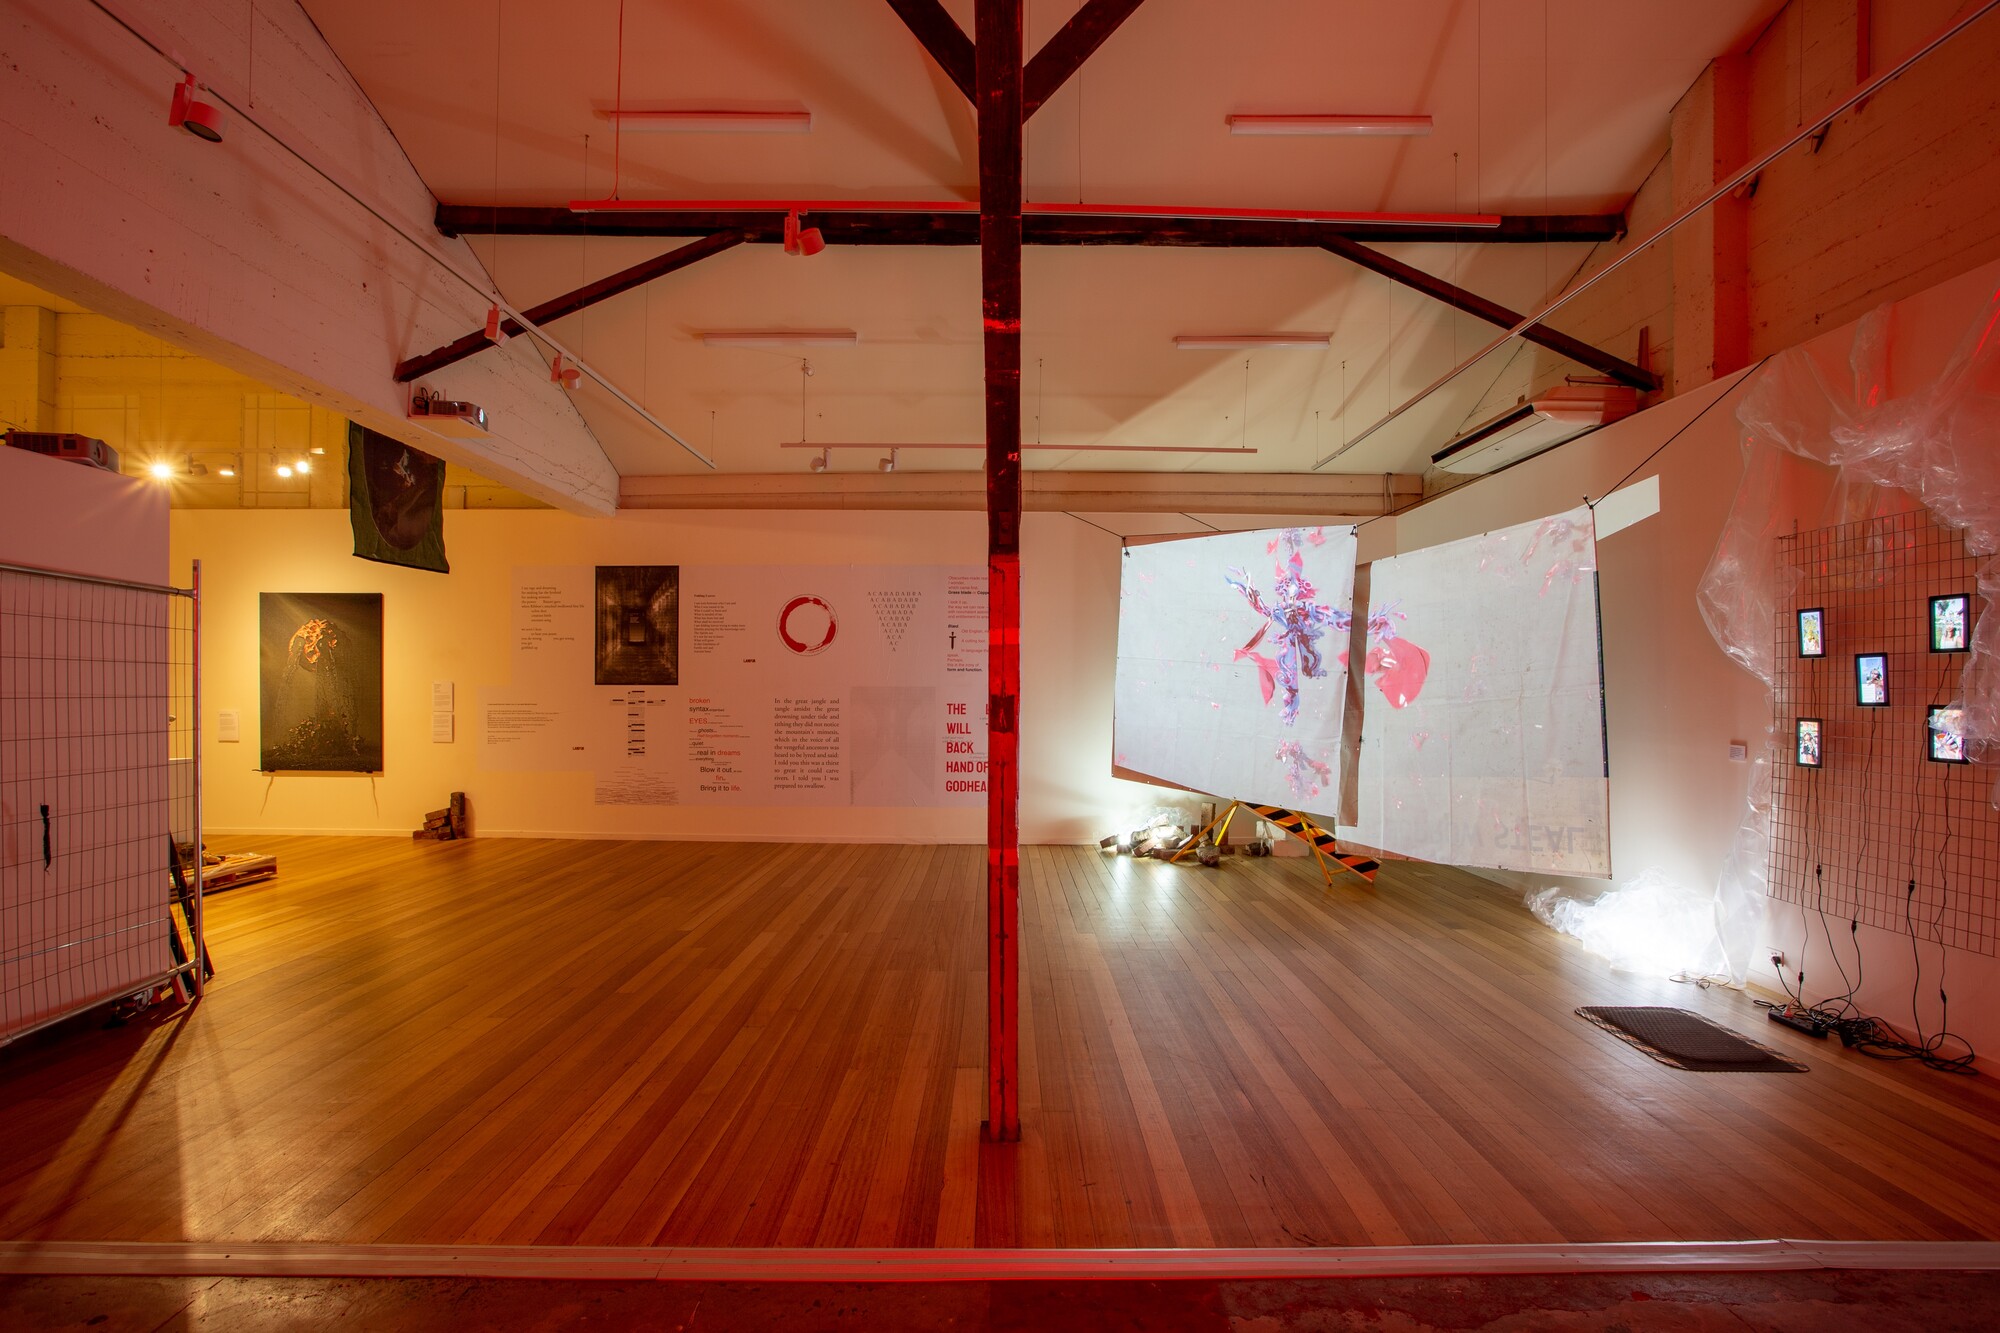 Installation view of <em>Aeon Resurrection</em>, 2022. Nicholas Aloisio-Shearer, <em>Reject Modernity, Embrace Tradition II: I Have Been In This Place Before,</em> 2021. Jacquard woven tapestry, silicon, pigment, aluminium, resin and bronze pigment; Thin Red Lines, <em>untitled,</em> 2022. Paste up poems on copy paper, excerpts collected in 2022; Huntrezz Janos, <em>video,</em> 2022. 3D video animation; Huntrezz Janos, <em>face filters</em>, 2022. Virtual and augmented reality face filters. Courtesy the gallery. Photo: Lucy Foster